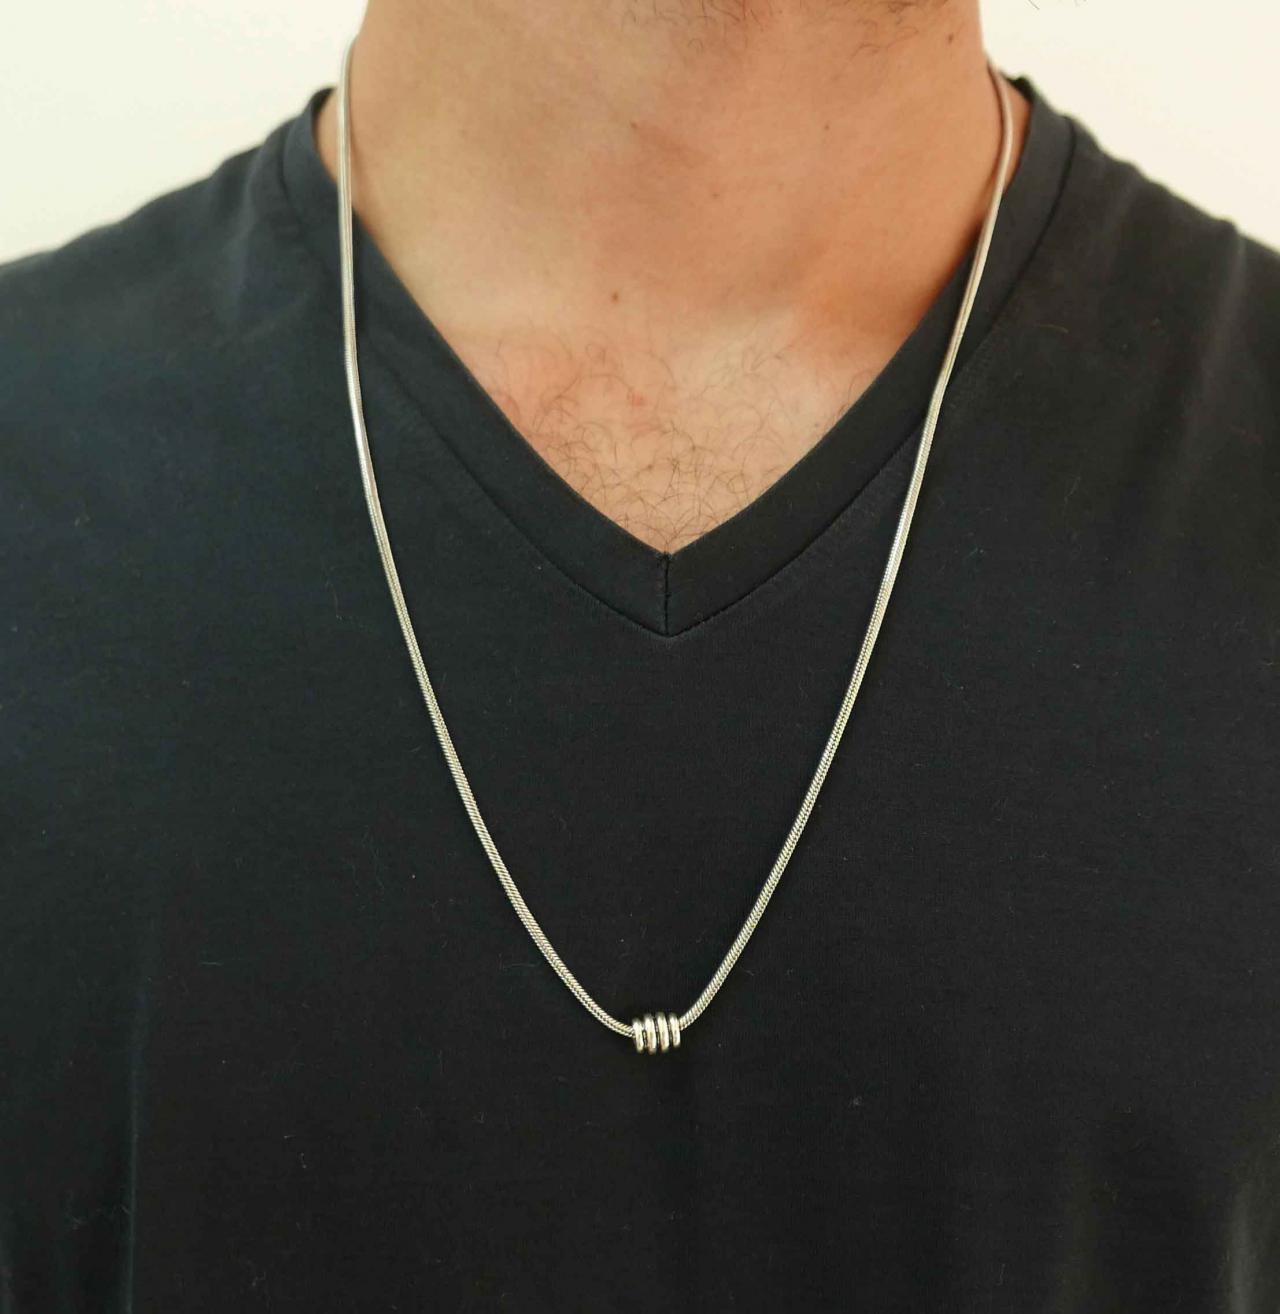 Men's Necklace - Men's Stainless Steel Necklace - Men's Beaded Necklace - Men's Pendant - Men's